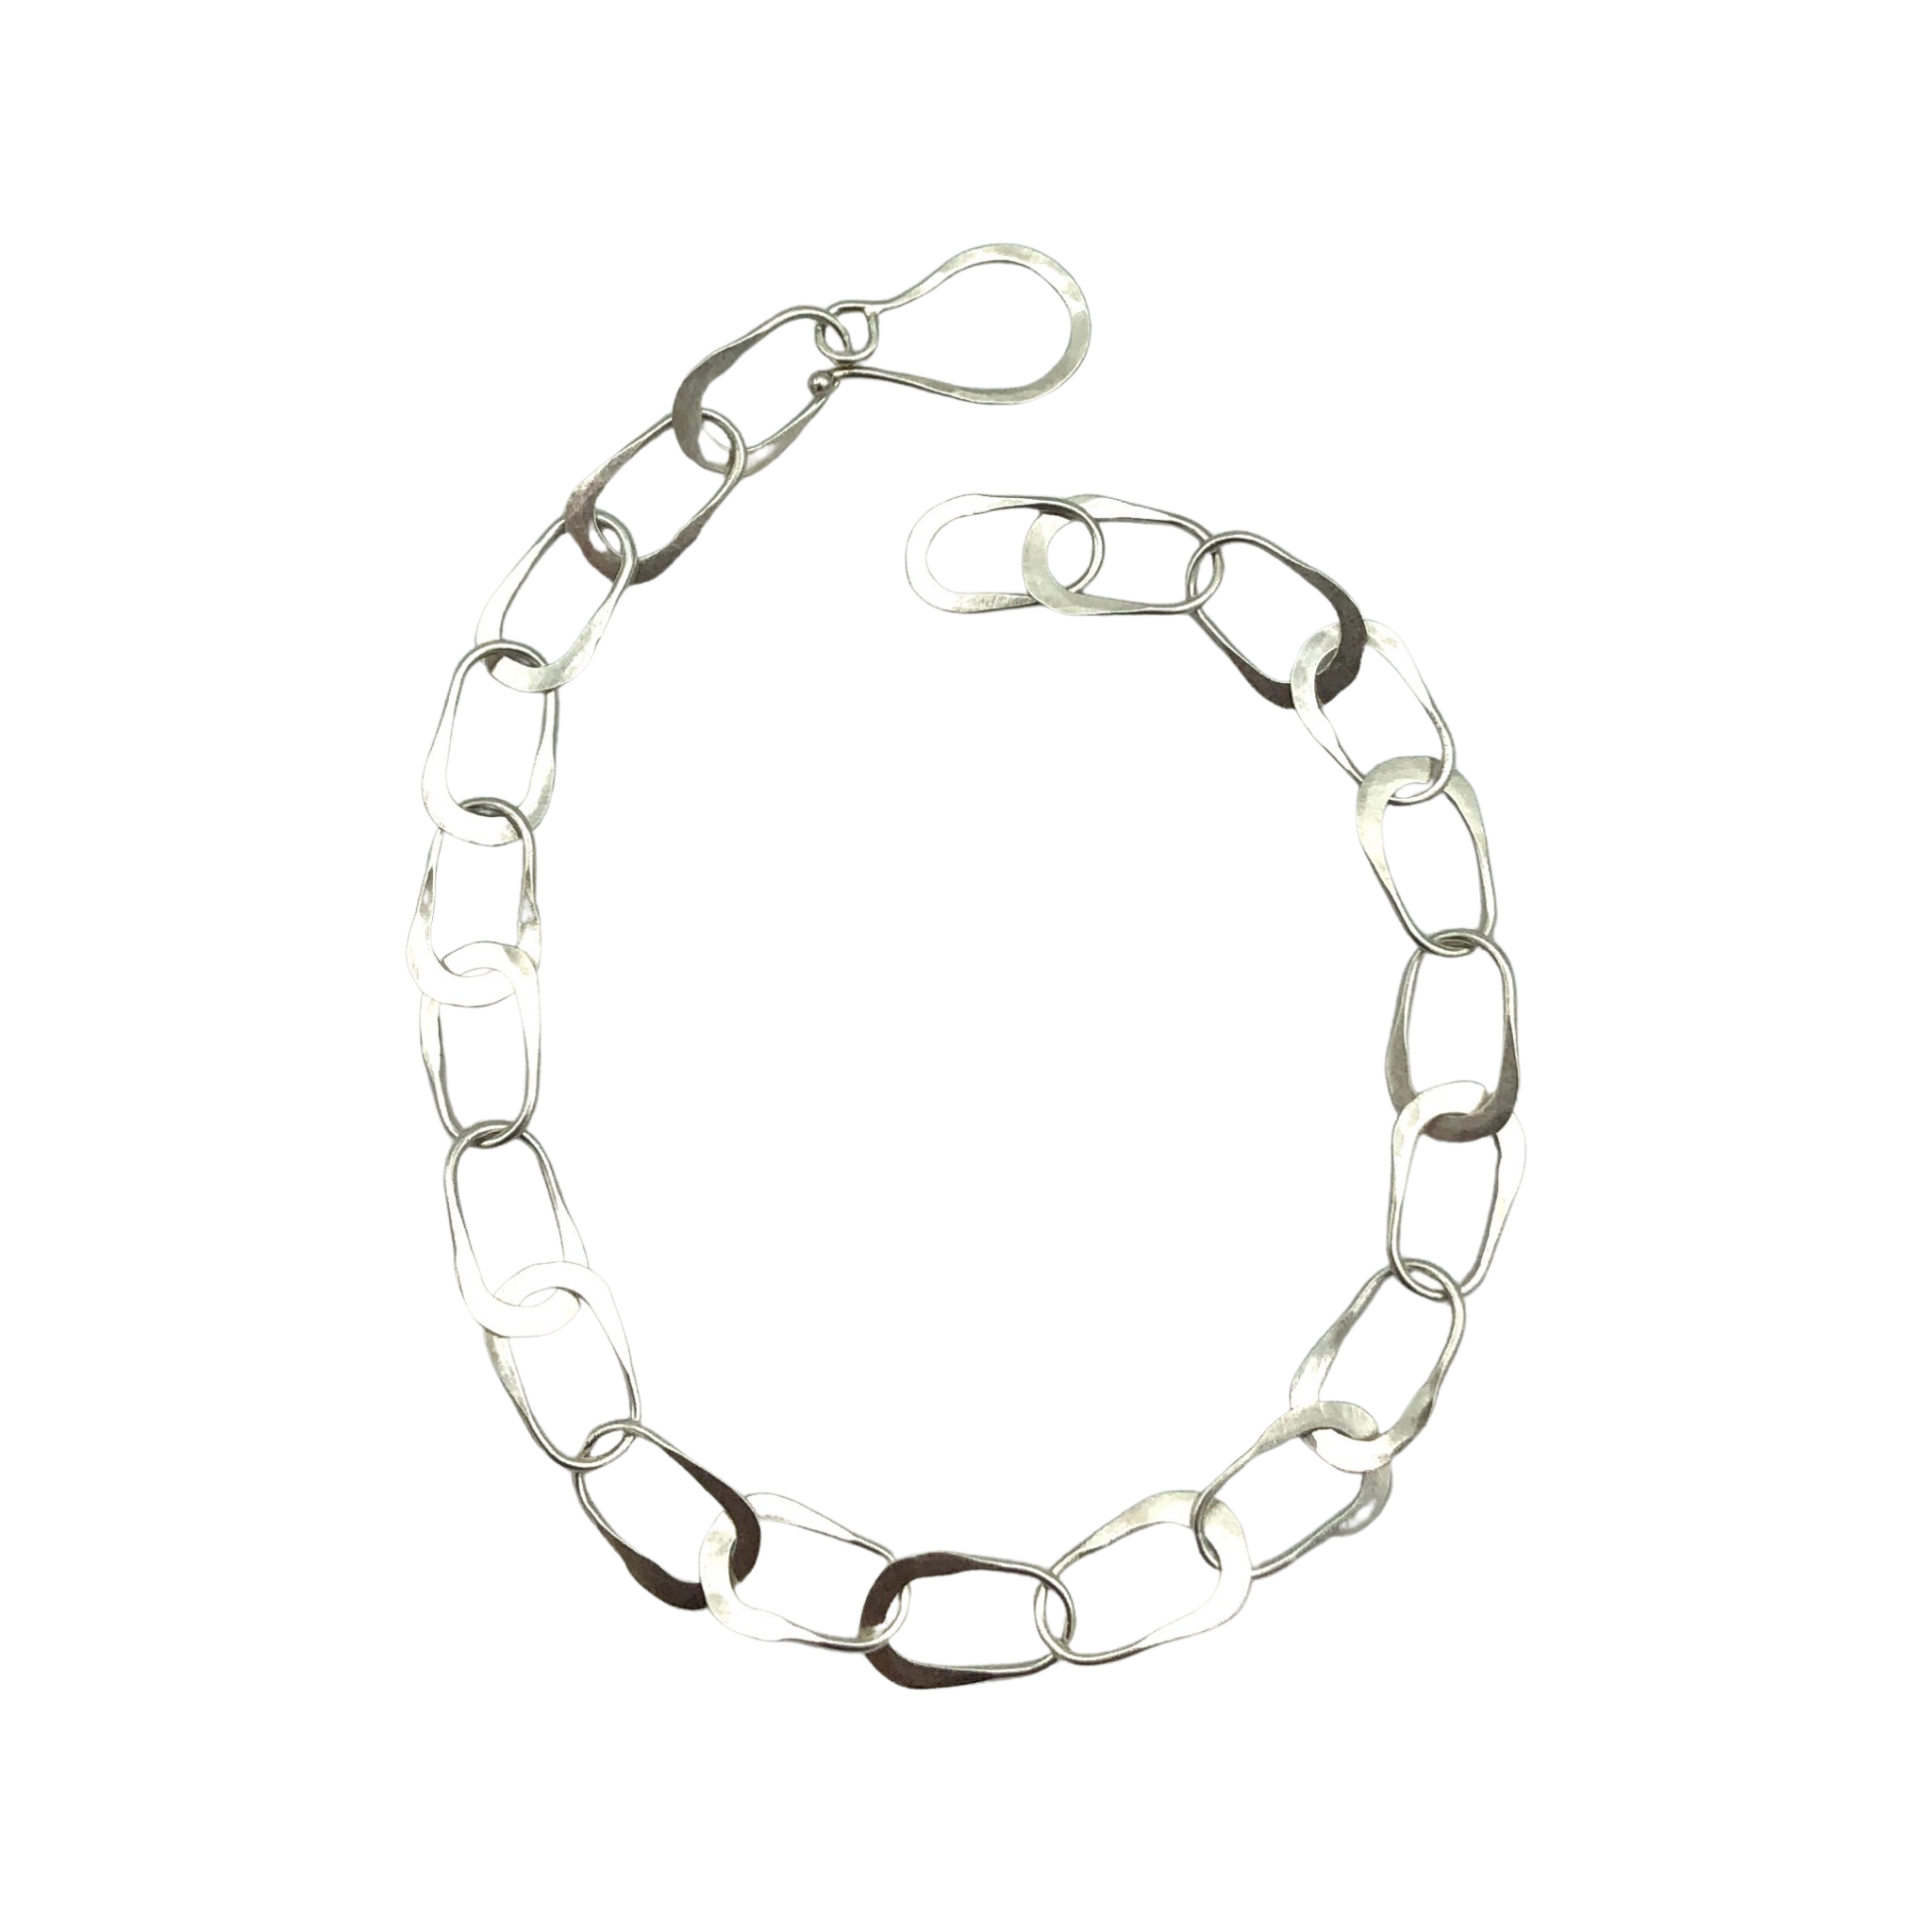 Hand Forged Aria Chain Sterling Silver Bracelet 7"